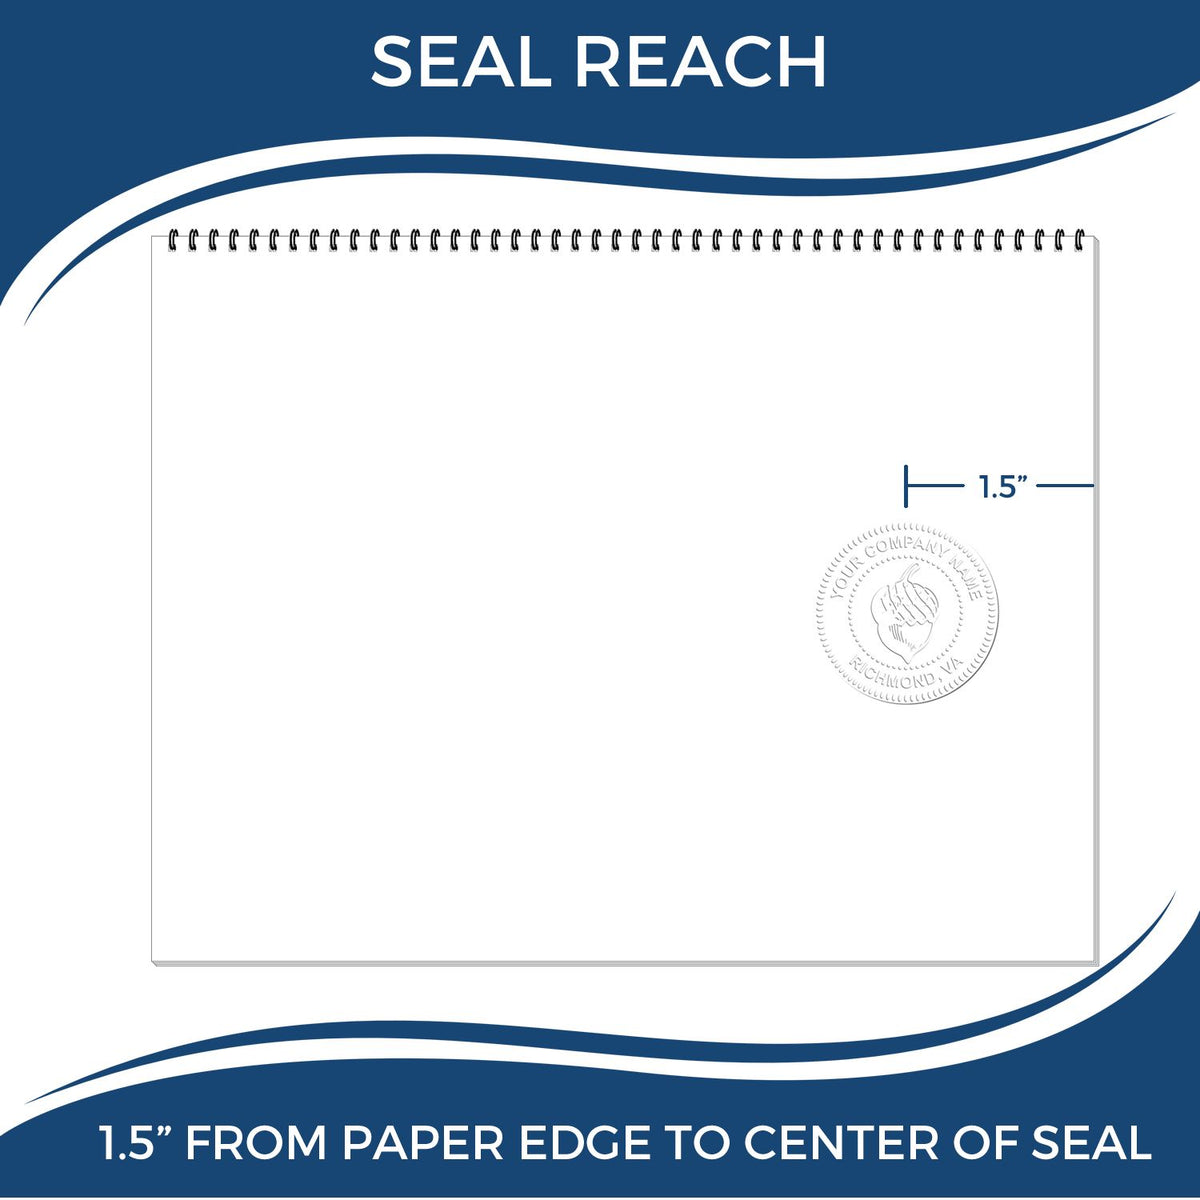 An infographic showing the seal reach which is represented by a ruler and a miniature seal image of the State of Maryland Soft Land Surveyor Embossing Seal